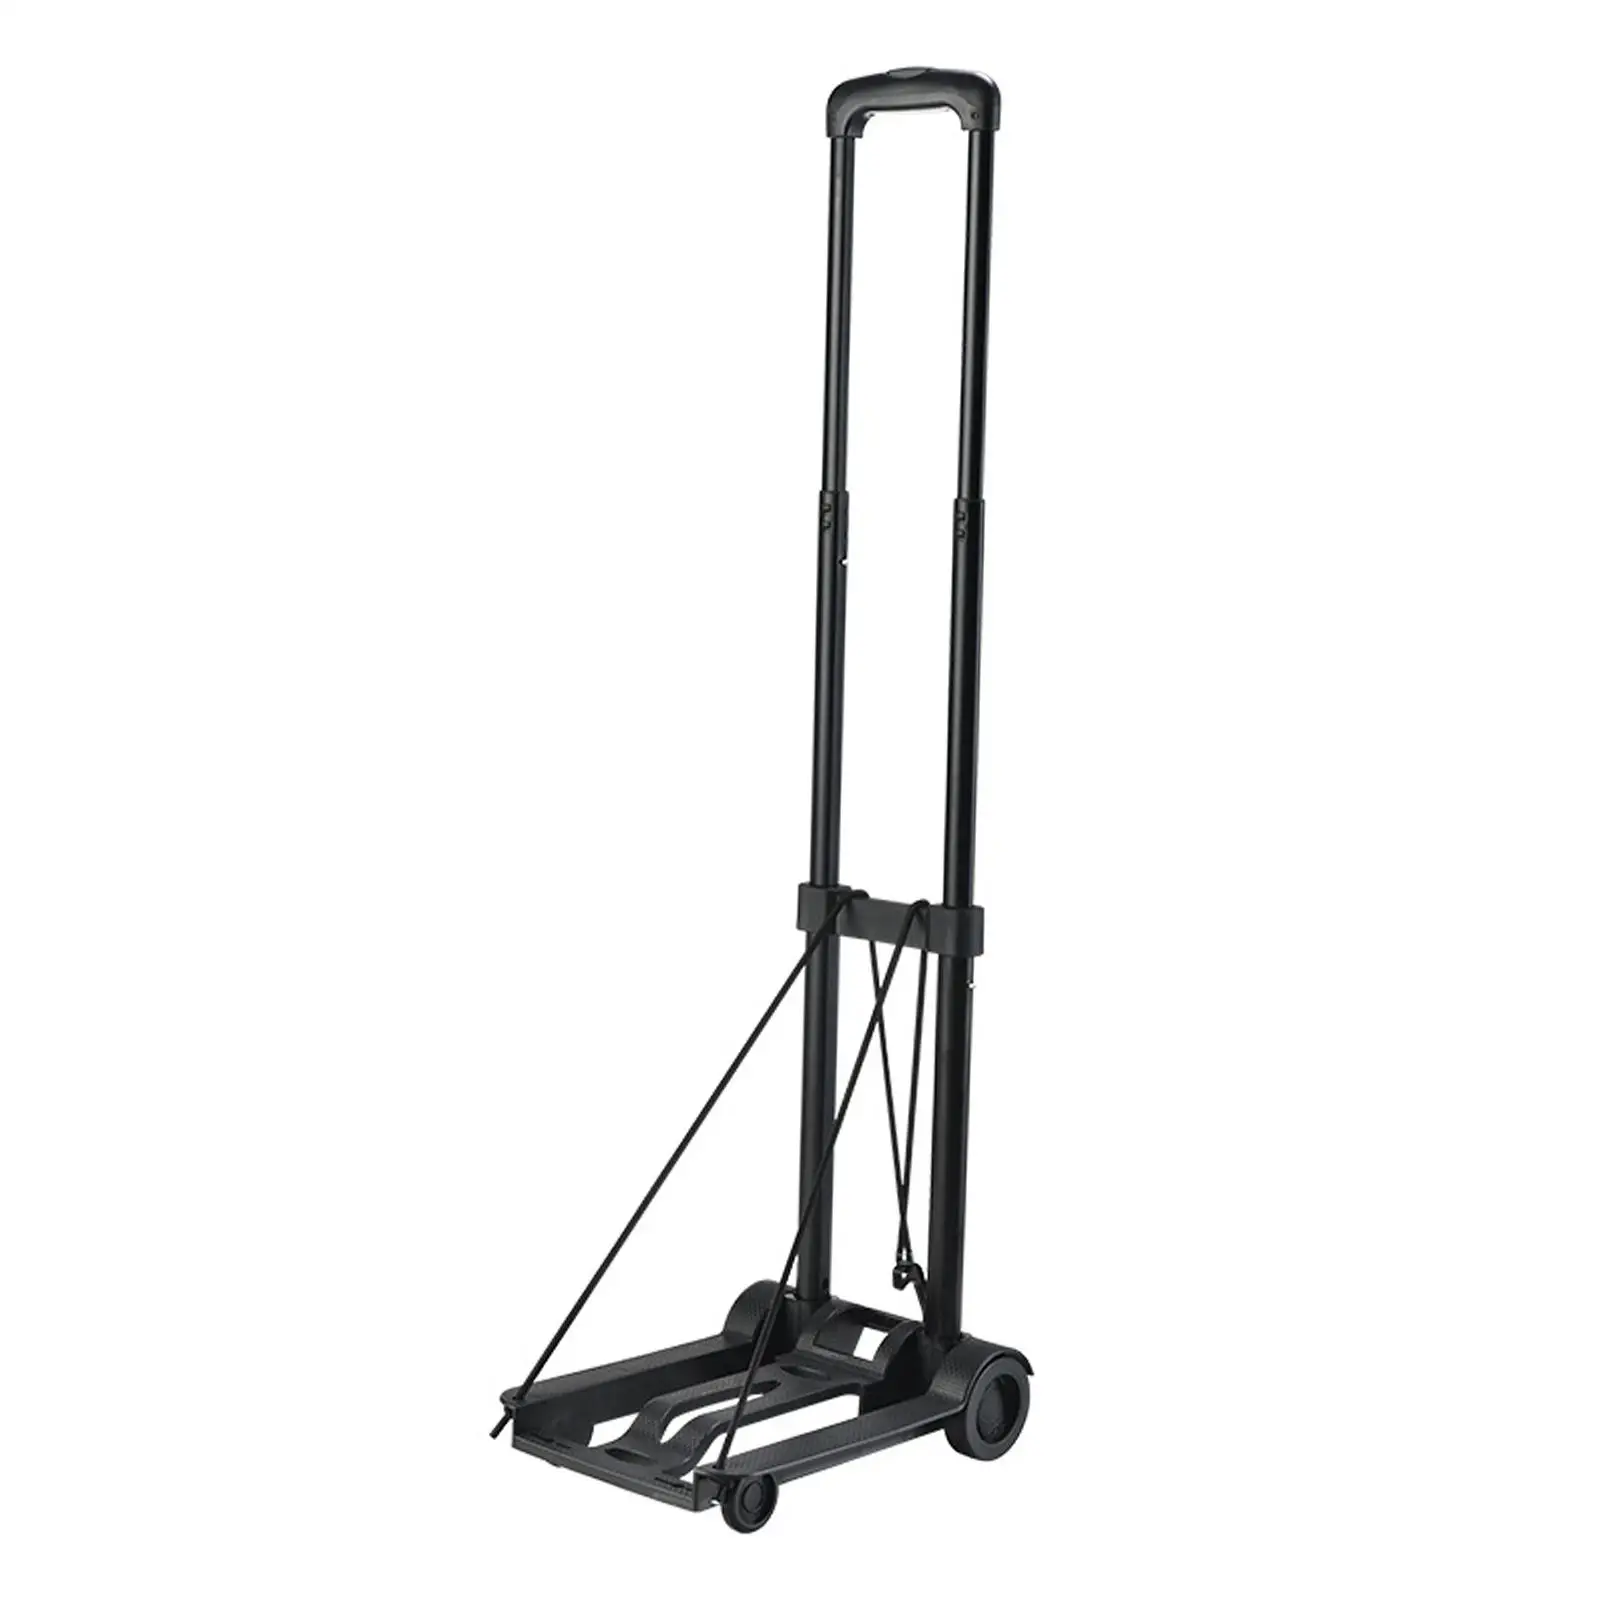 Multi Purpose Folding Hand Truck Heavy Duty Adjustable Handle Luggage Trolley Cart for Moving Transportation Travel Carrying